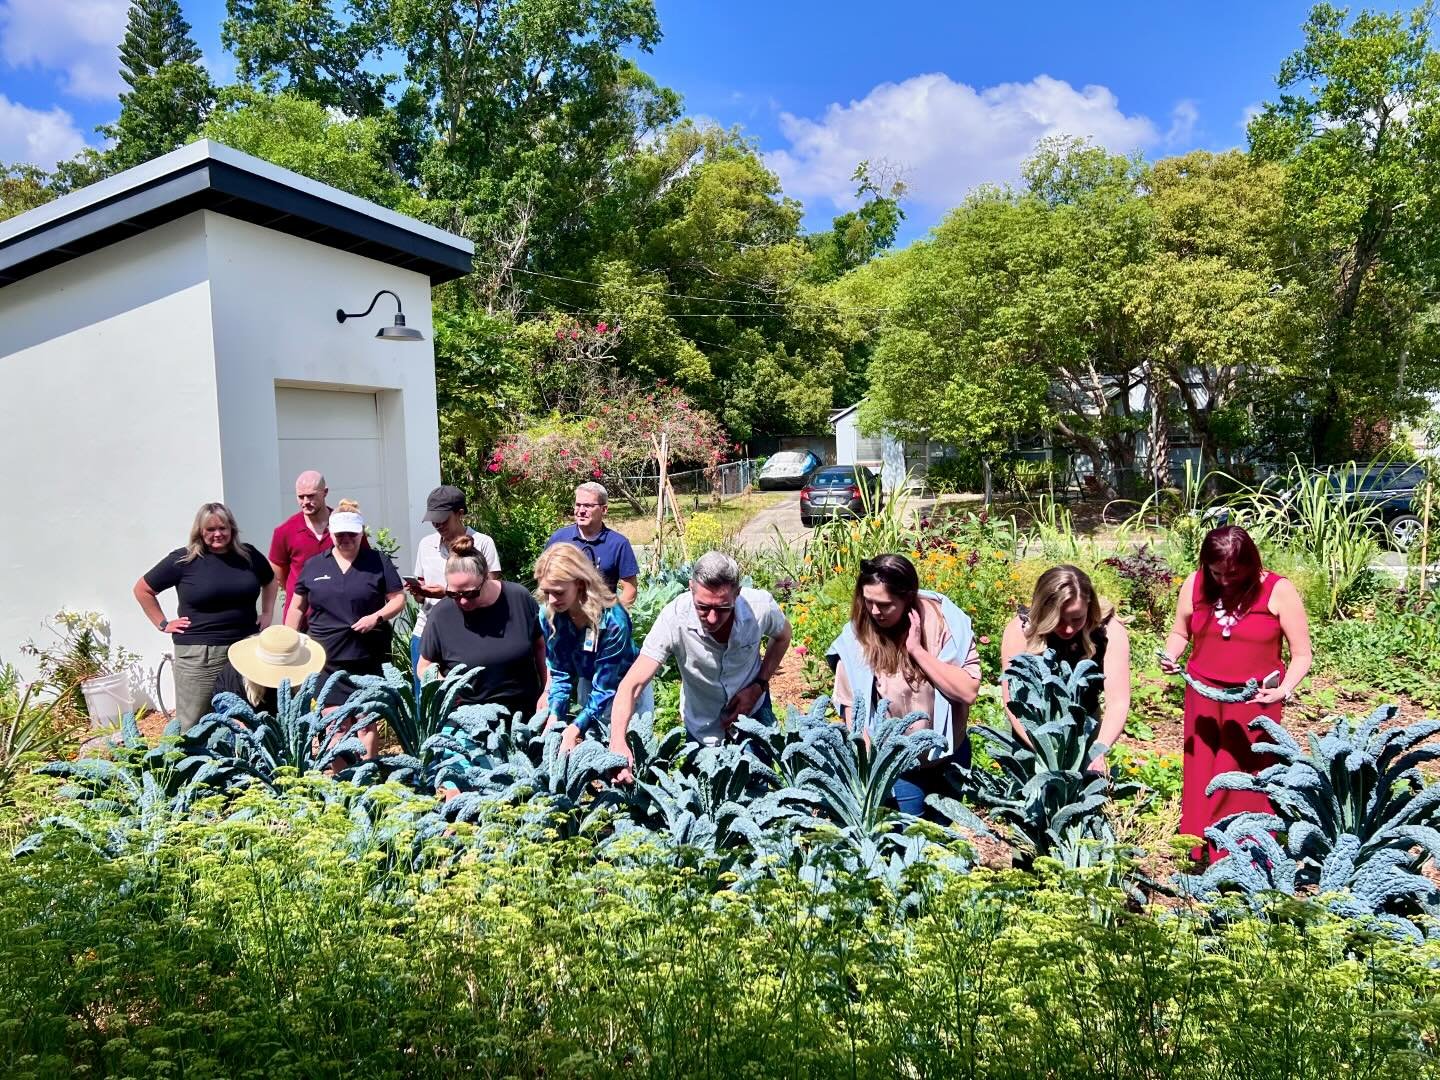 From garden to kitchen, join us for a corporate team building experience that&hellip; 
1️⃣ combines wellness with bonding
2️⃣ takes place in an inspirational environment
3️⃣ changes the way your team thinks about food and community 

Our Corporate Te